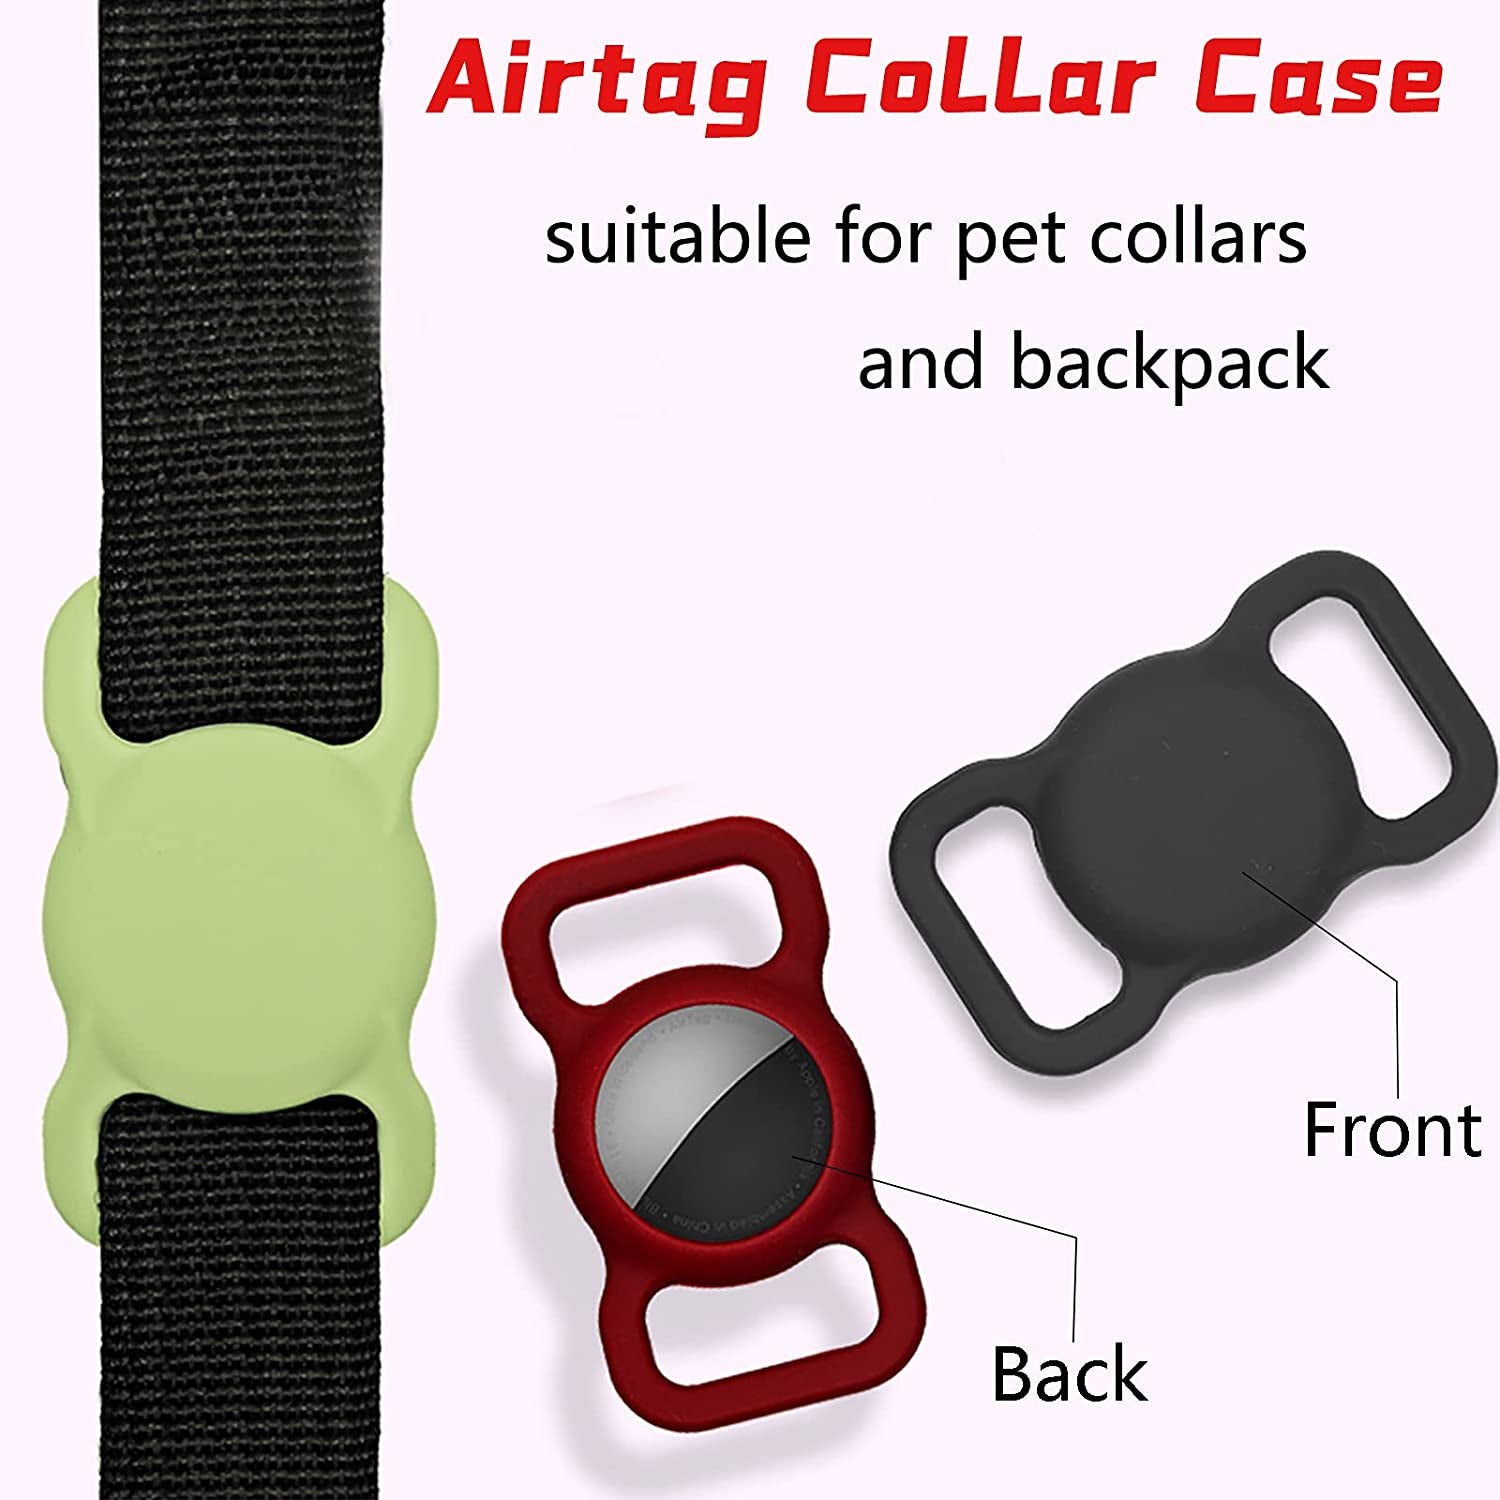 Neotrixqi Airtag Dog Collar Holder, Airtag Holder Accessories for Apple Airtags Tracker with 4 Pack HD Protective Film, Silicone Air Tag Case for Air Tags Pet Collar Loop Necklace Backpack Bag Electronics > GPS Accessories > GPS Cases NeotrixQI   